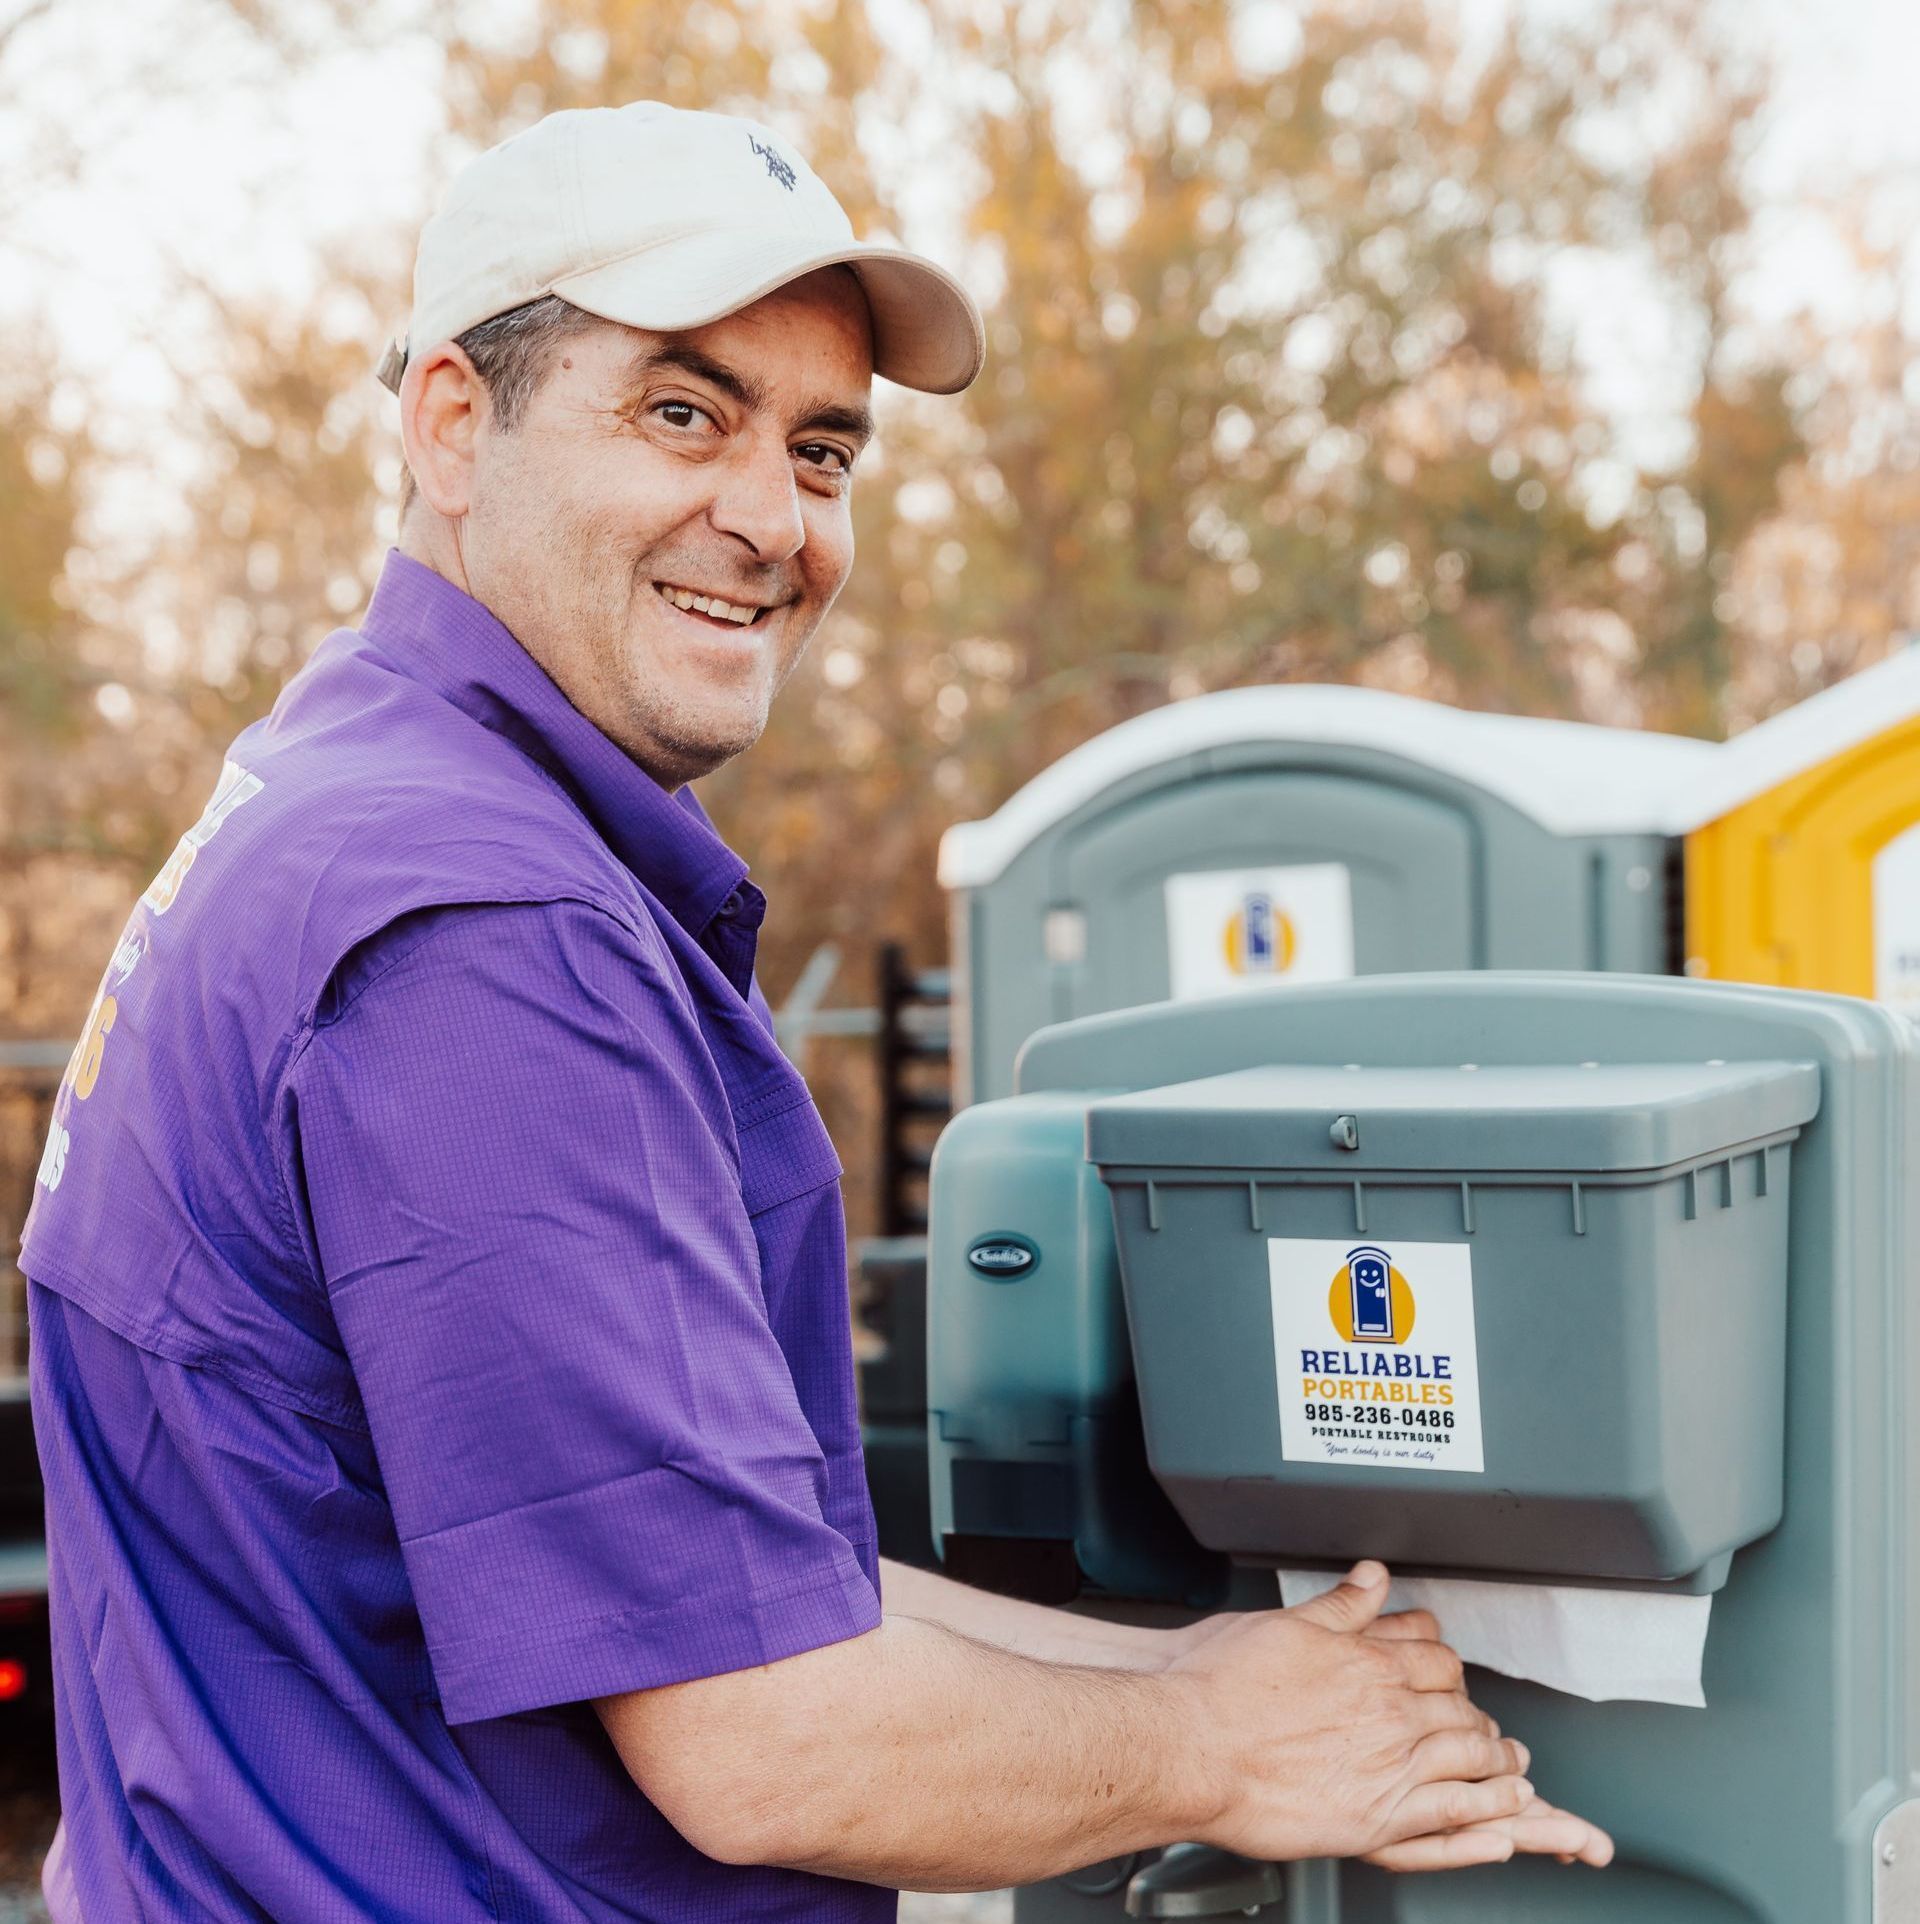 A man in a purple shirt is standing in front of a portable toilet